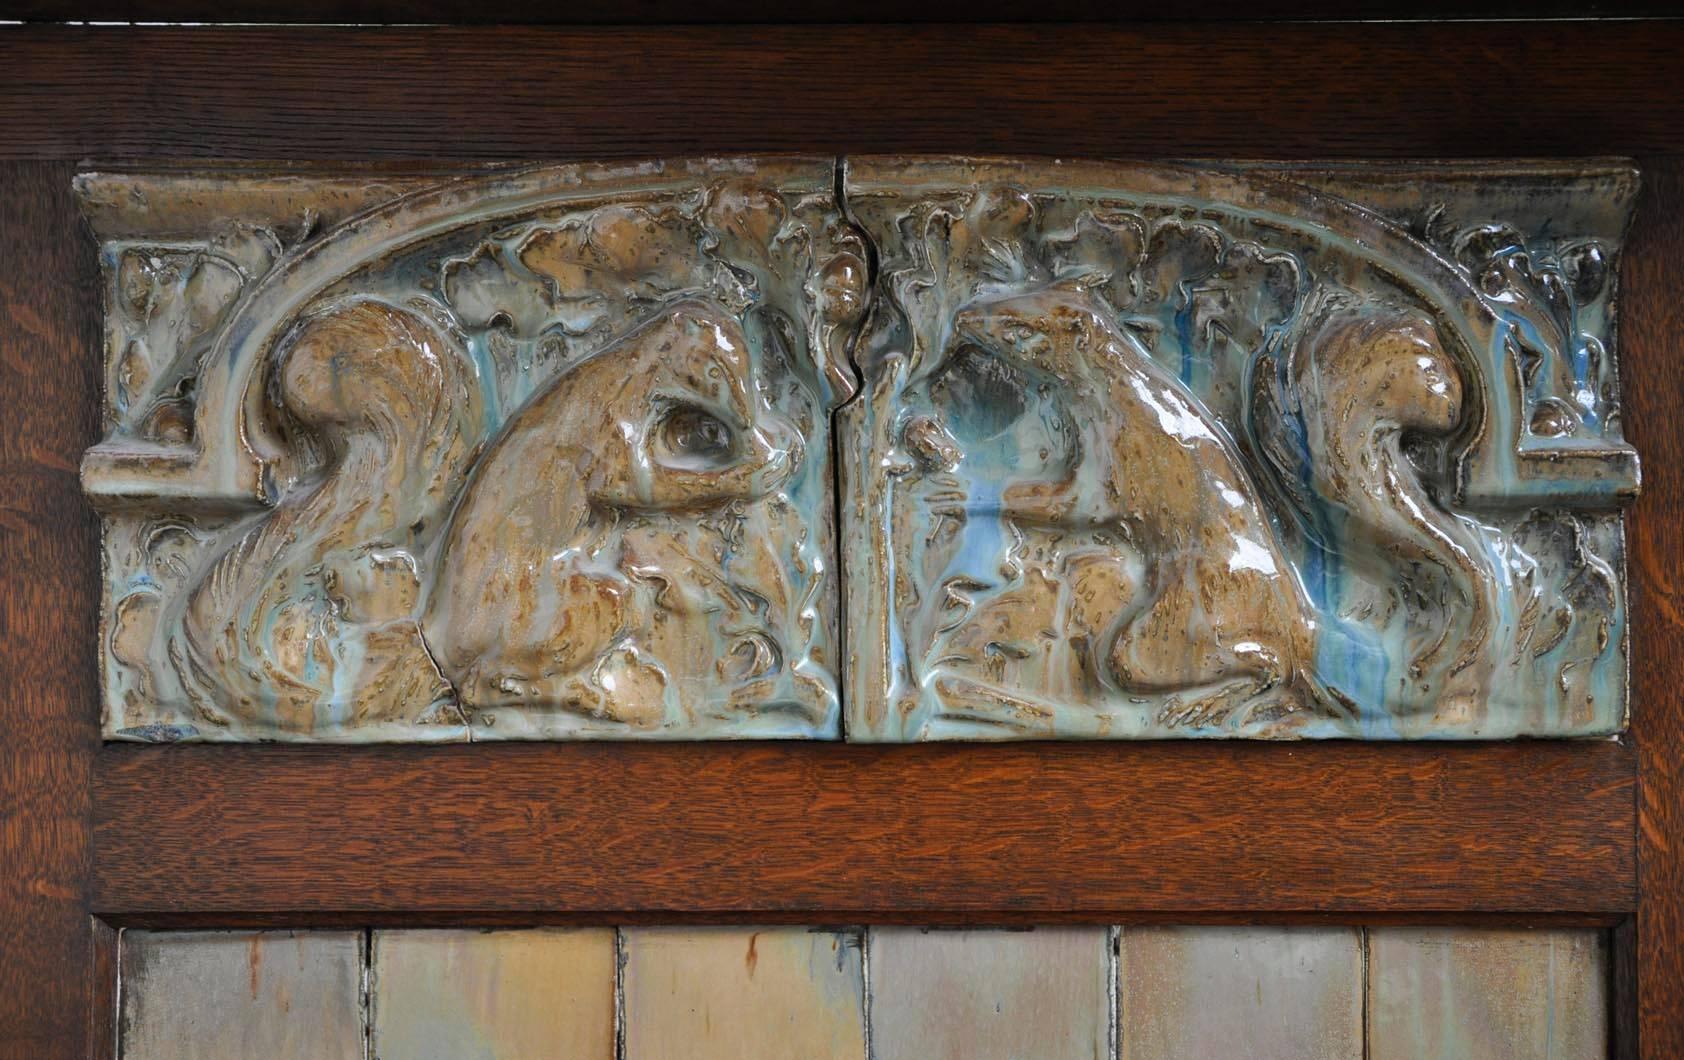 This rare Art Nouveau fireplace was made out of oak wood and ceramic and is attributed to Charles Gréber from the Gréber Manufacture. The upper part is ornated with a frieze with two squirrels and Art Nouveau columns with foliages. 
Legs are